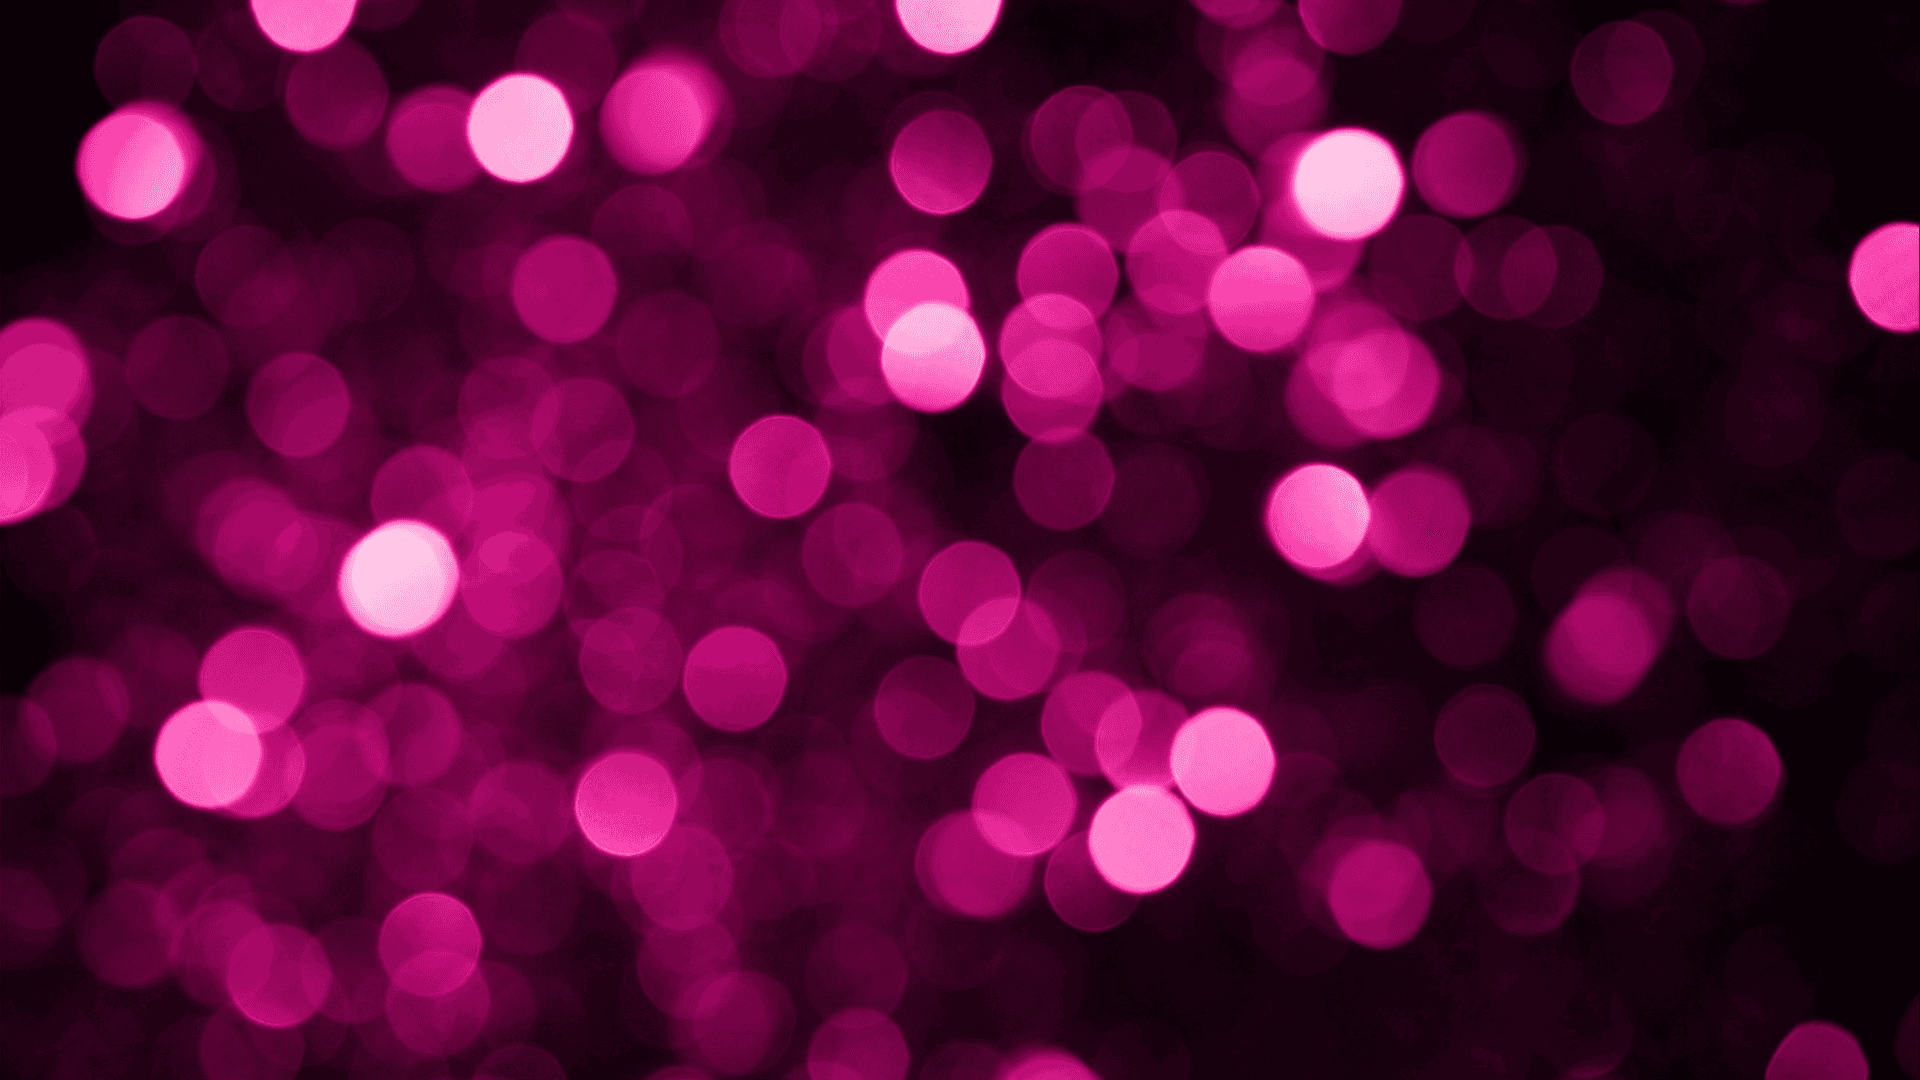 Enjoy a perfect background of pink sparkles.